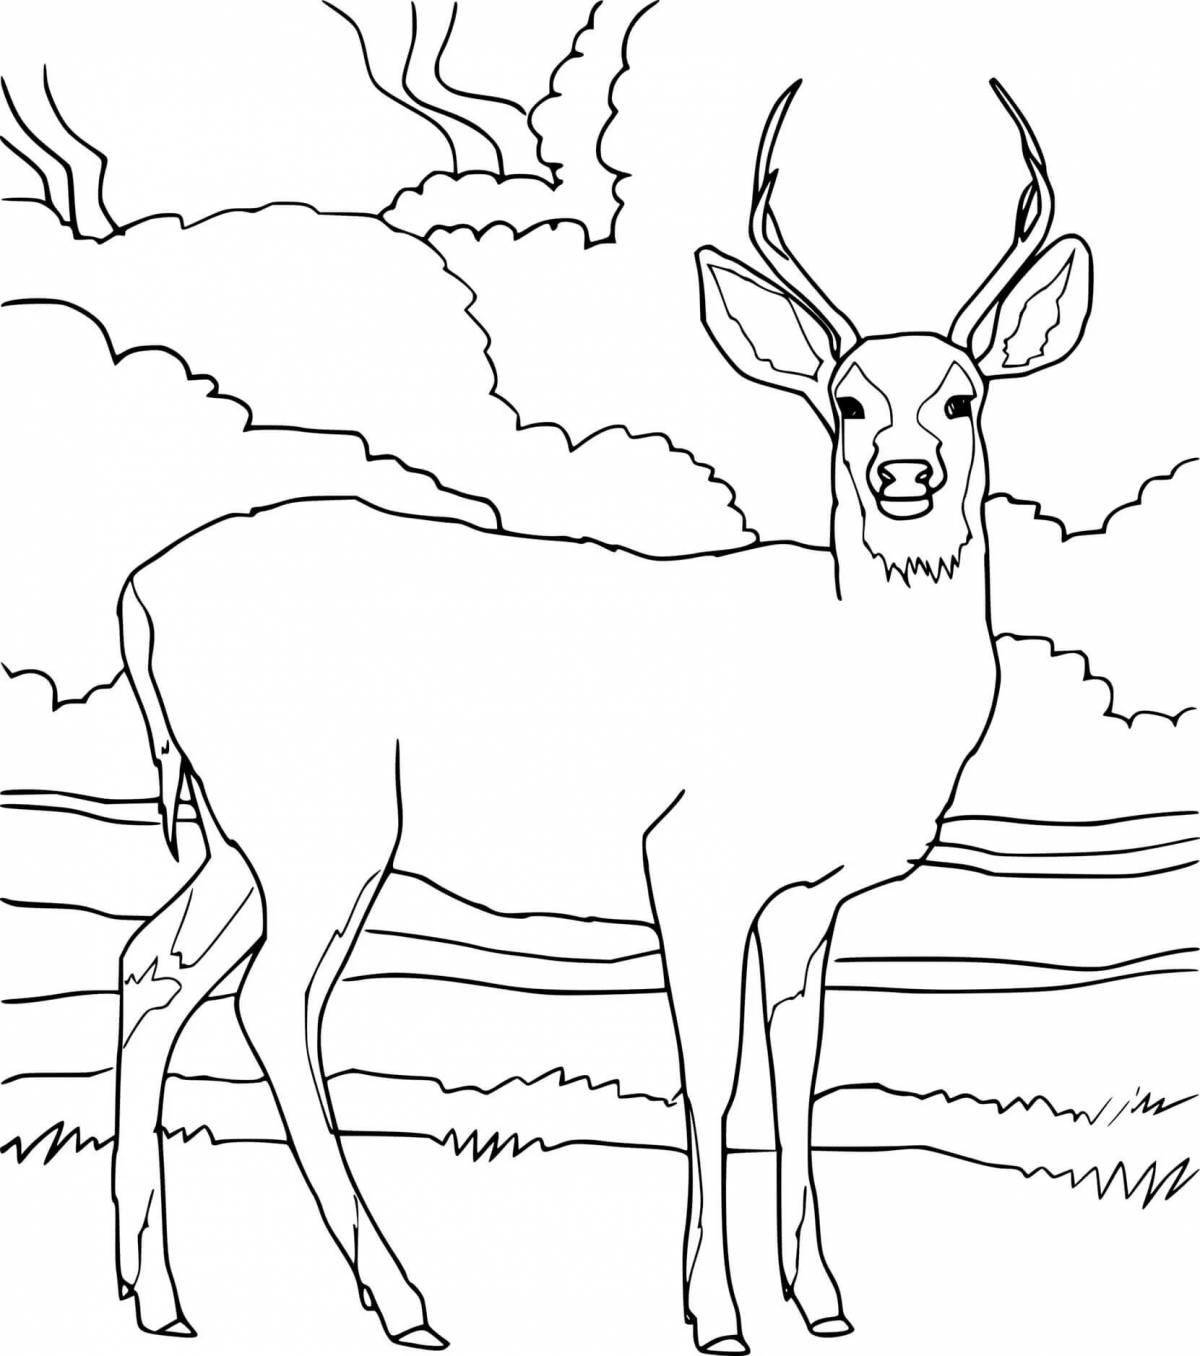 Exciting roe deer coloring for juniors